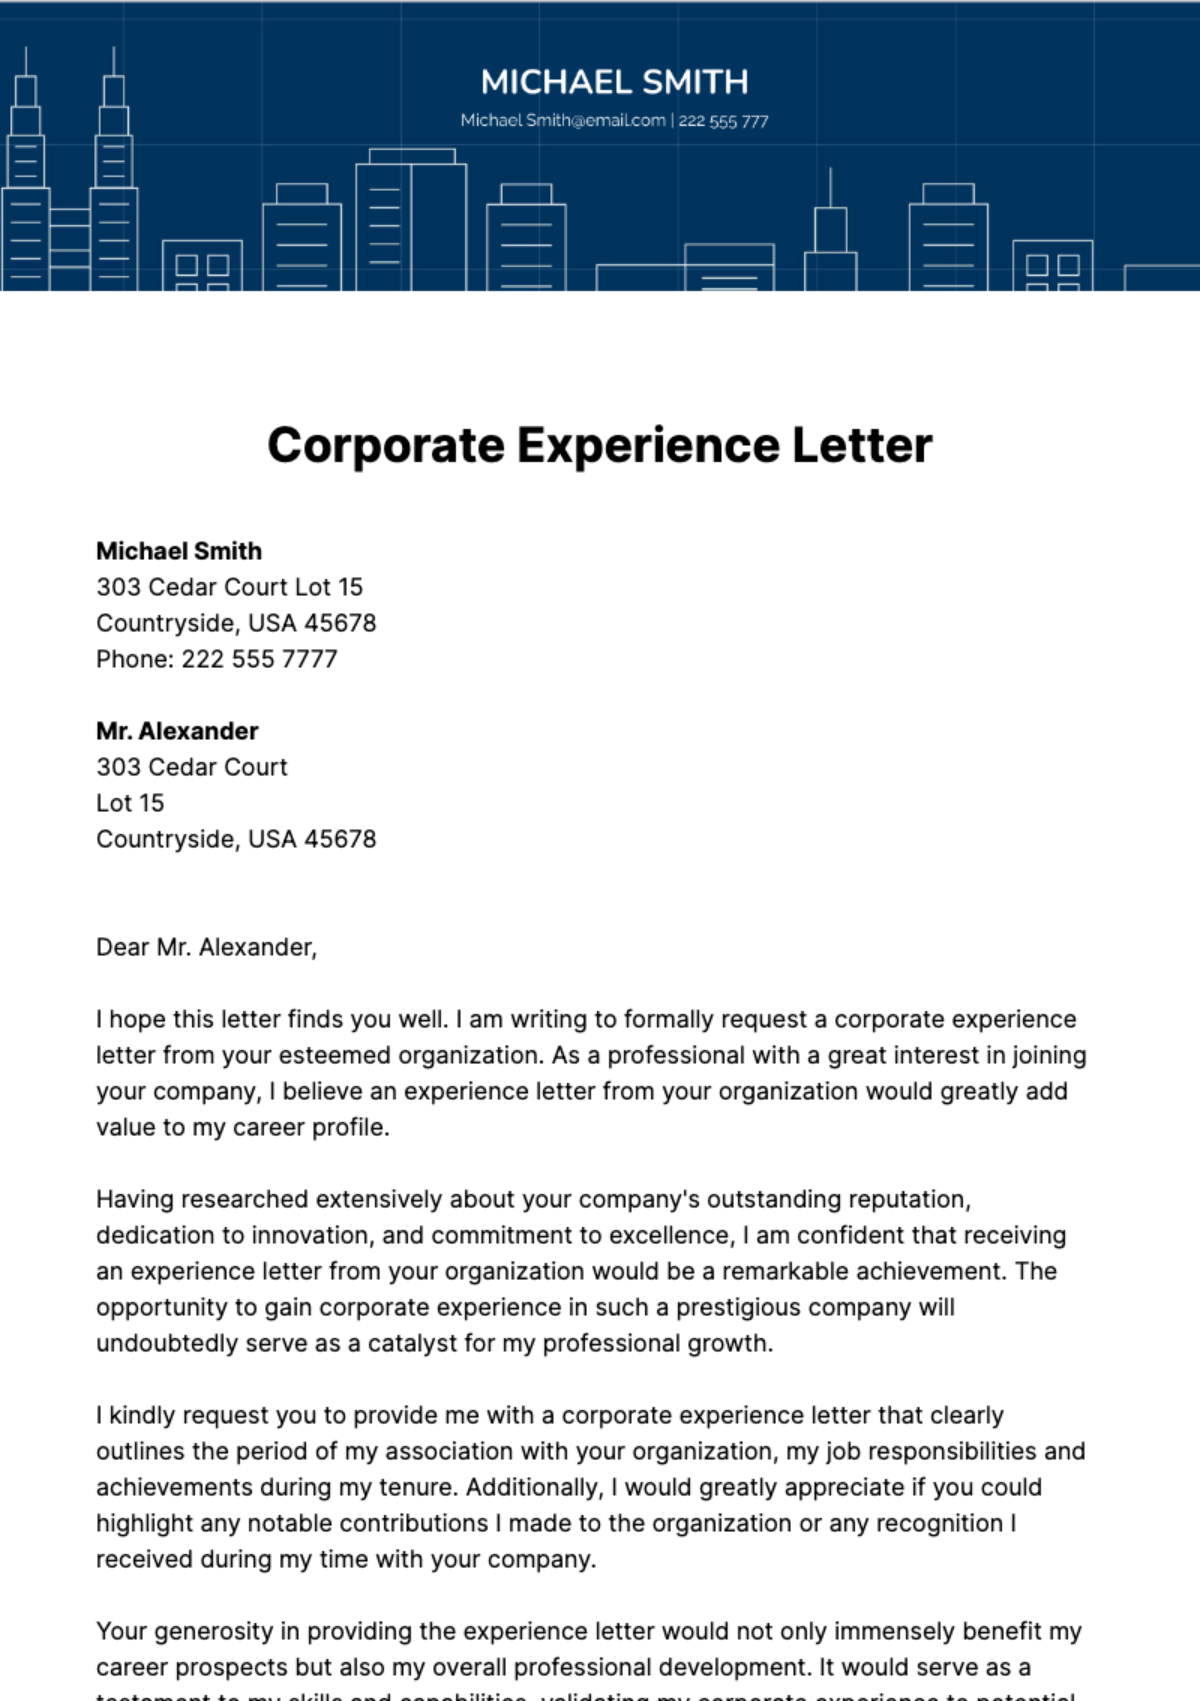 Free Corporate Experience Letter Template